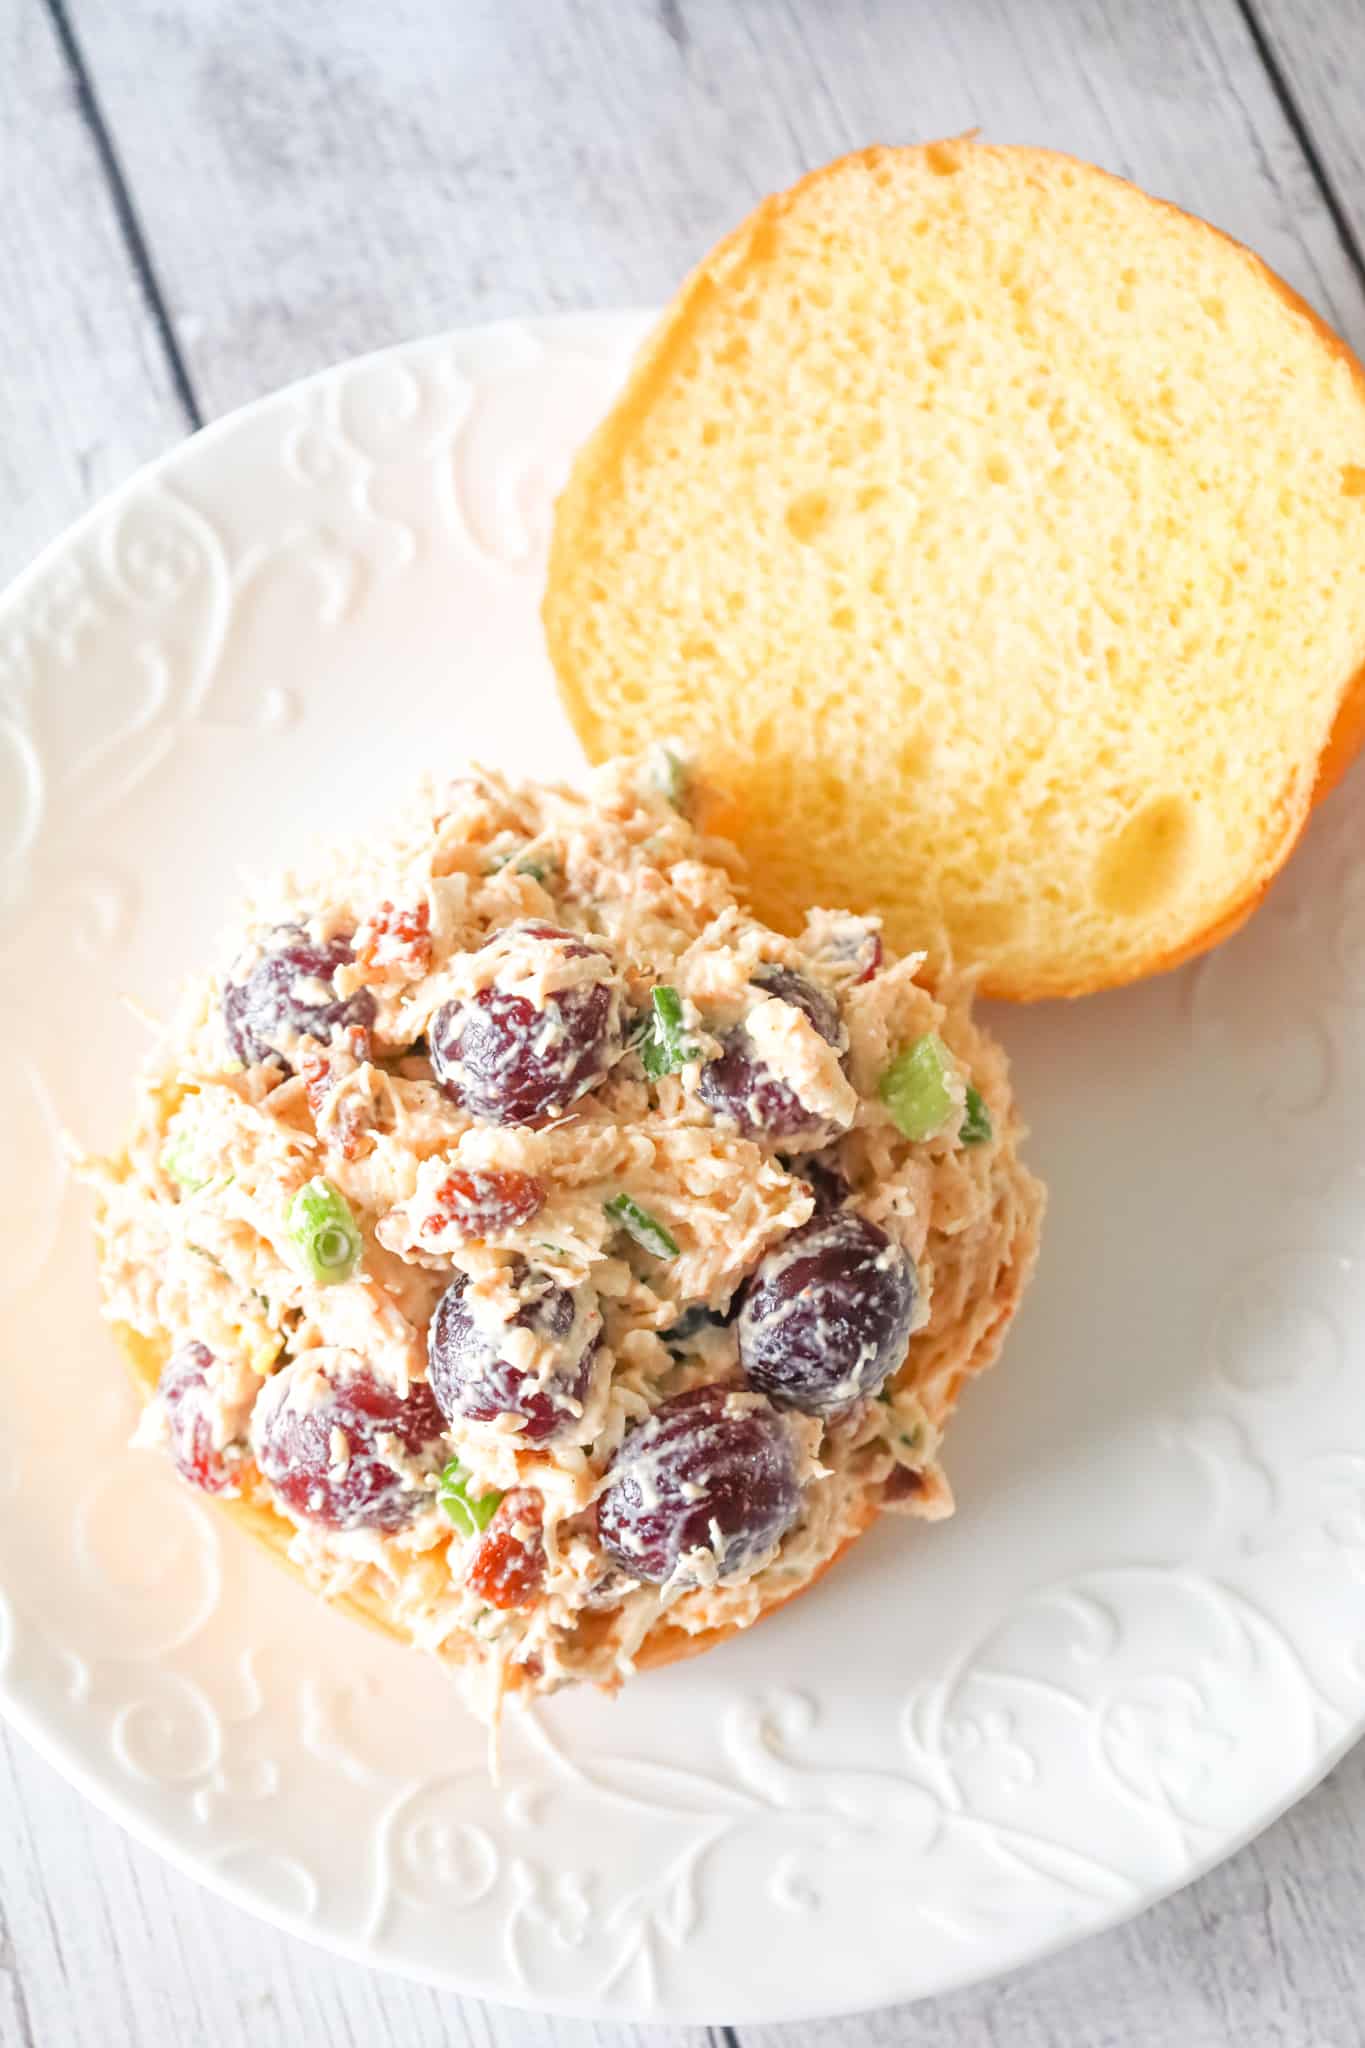 Chicken Salad with Grapes is a delicious lunch or dinner recipe using shredded rotisserie chicken and loaded with mayo, red grapes, pecans, chopped green onion and shredded mozzarella cheese.